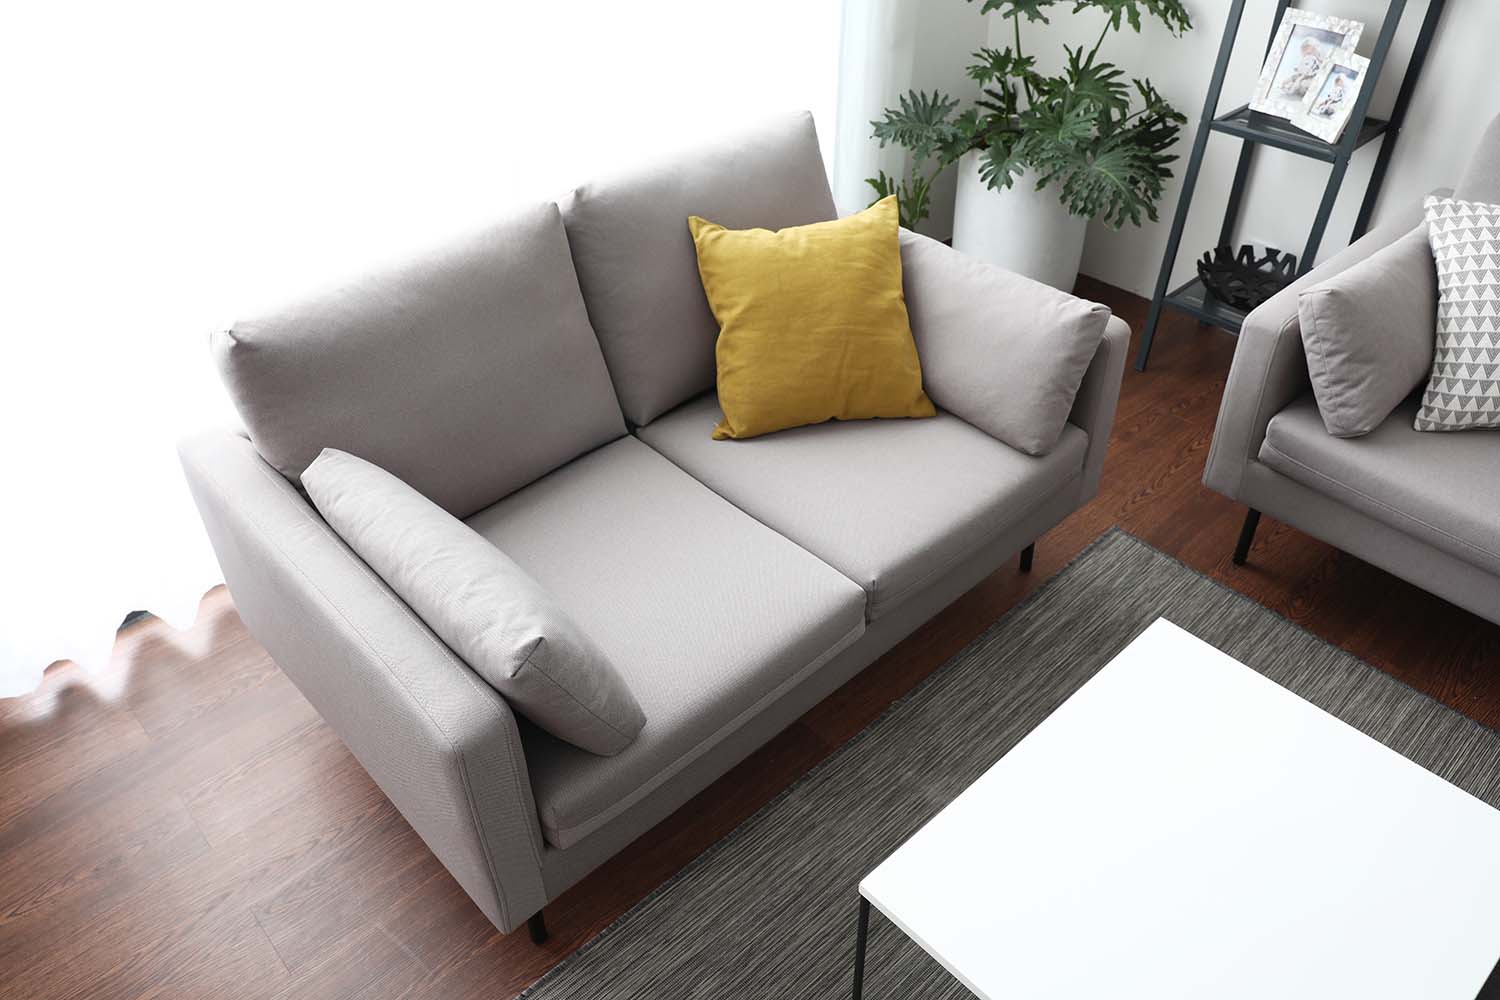 Side view of the Luna Sofa 3 seater sofa showcasing its ability to comfortably accommodate 3 seaters.